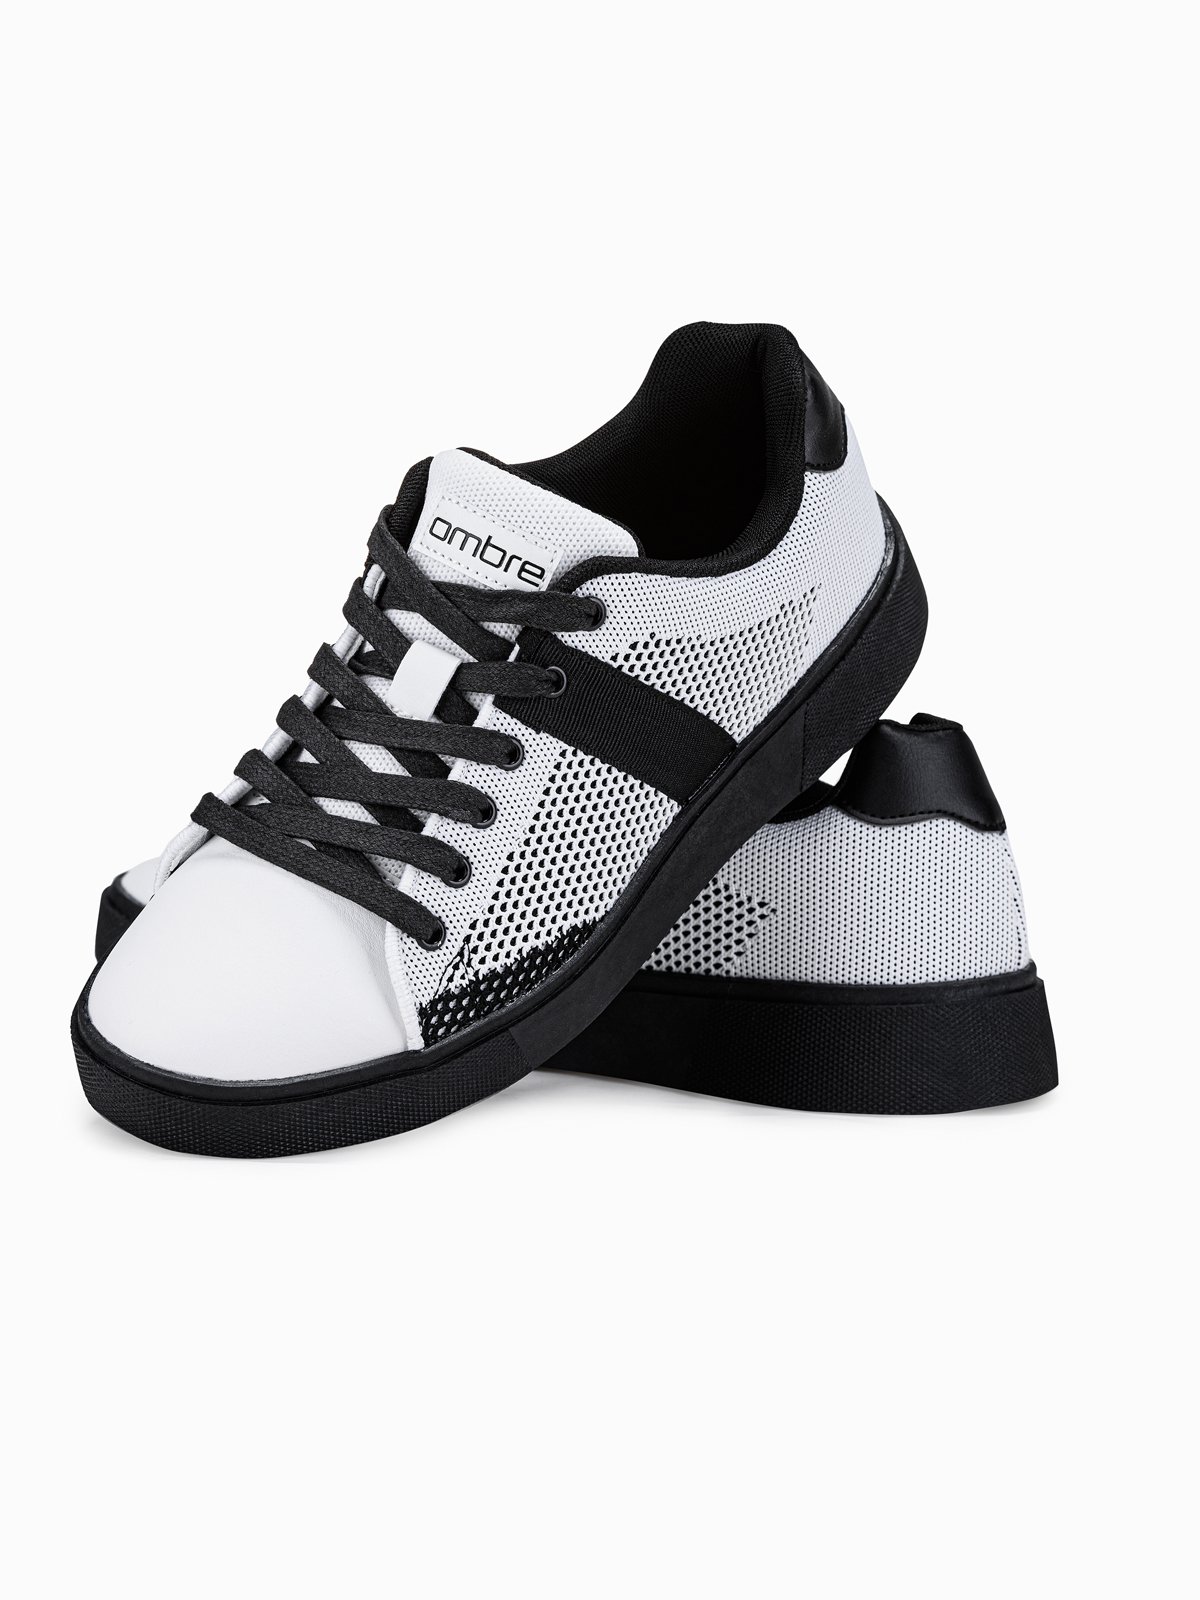 mens white and black trainers